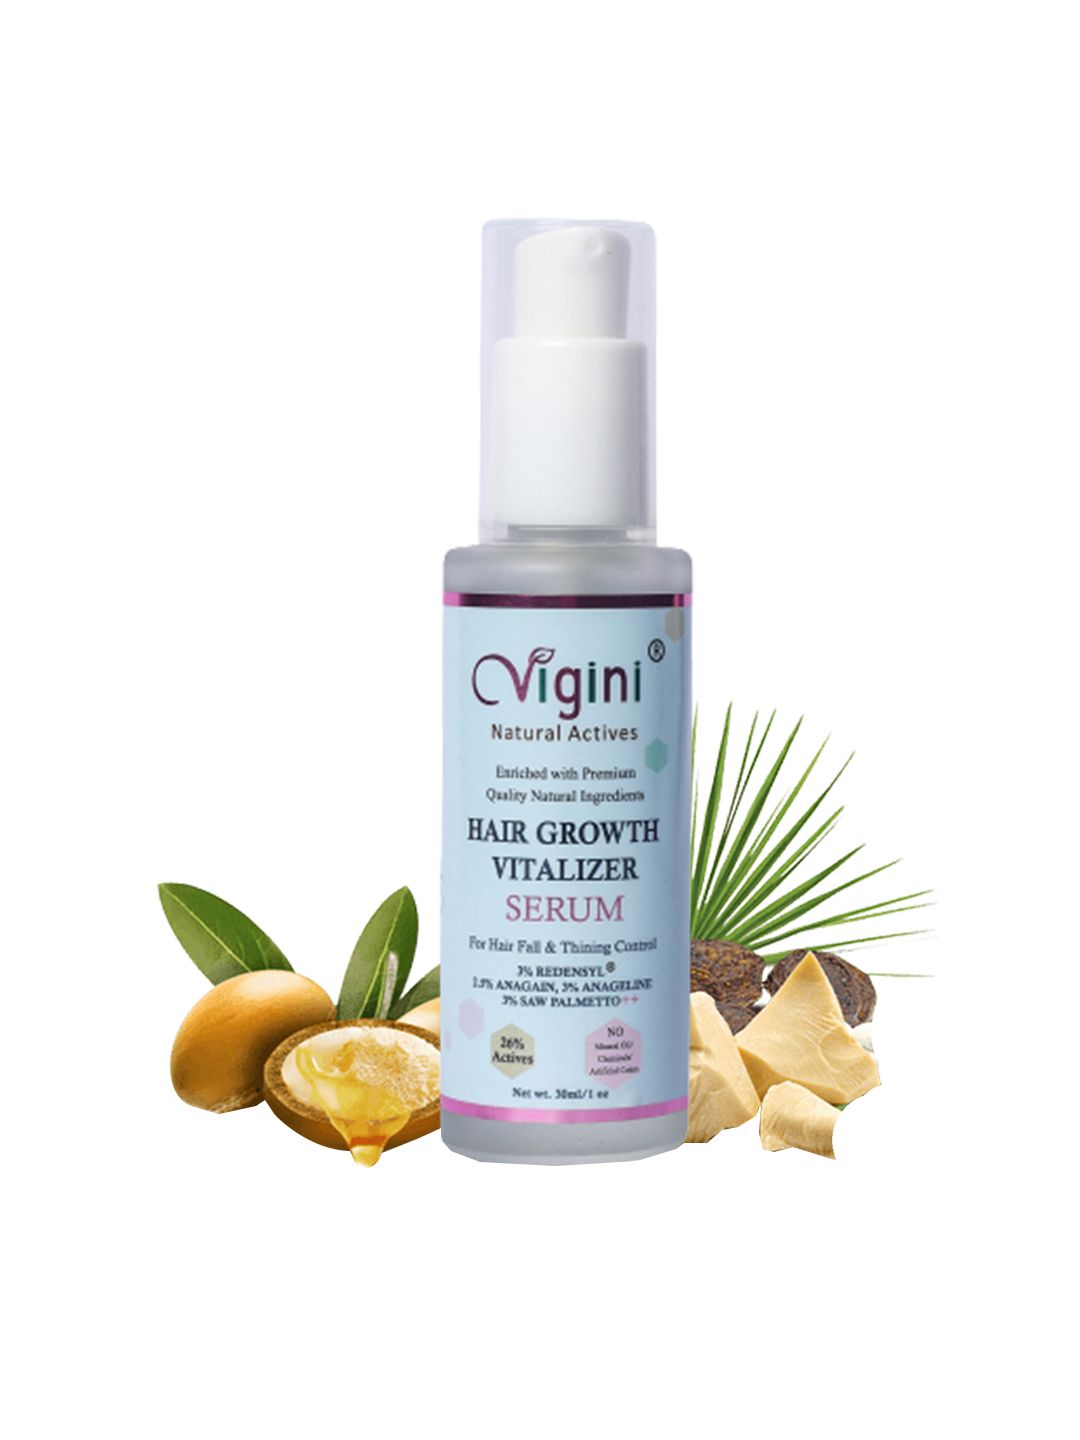 Vigini Natural Actives Hair Growth Vitalizer Serum with Redensyl & Saw Palmetto 30 ml Price in India